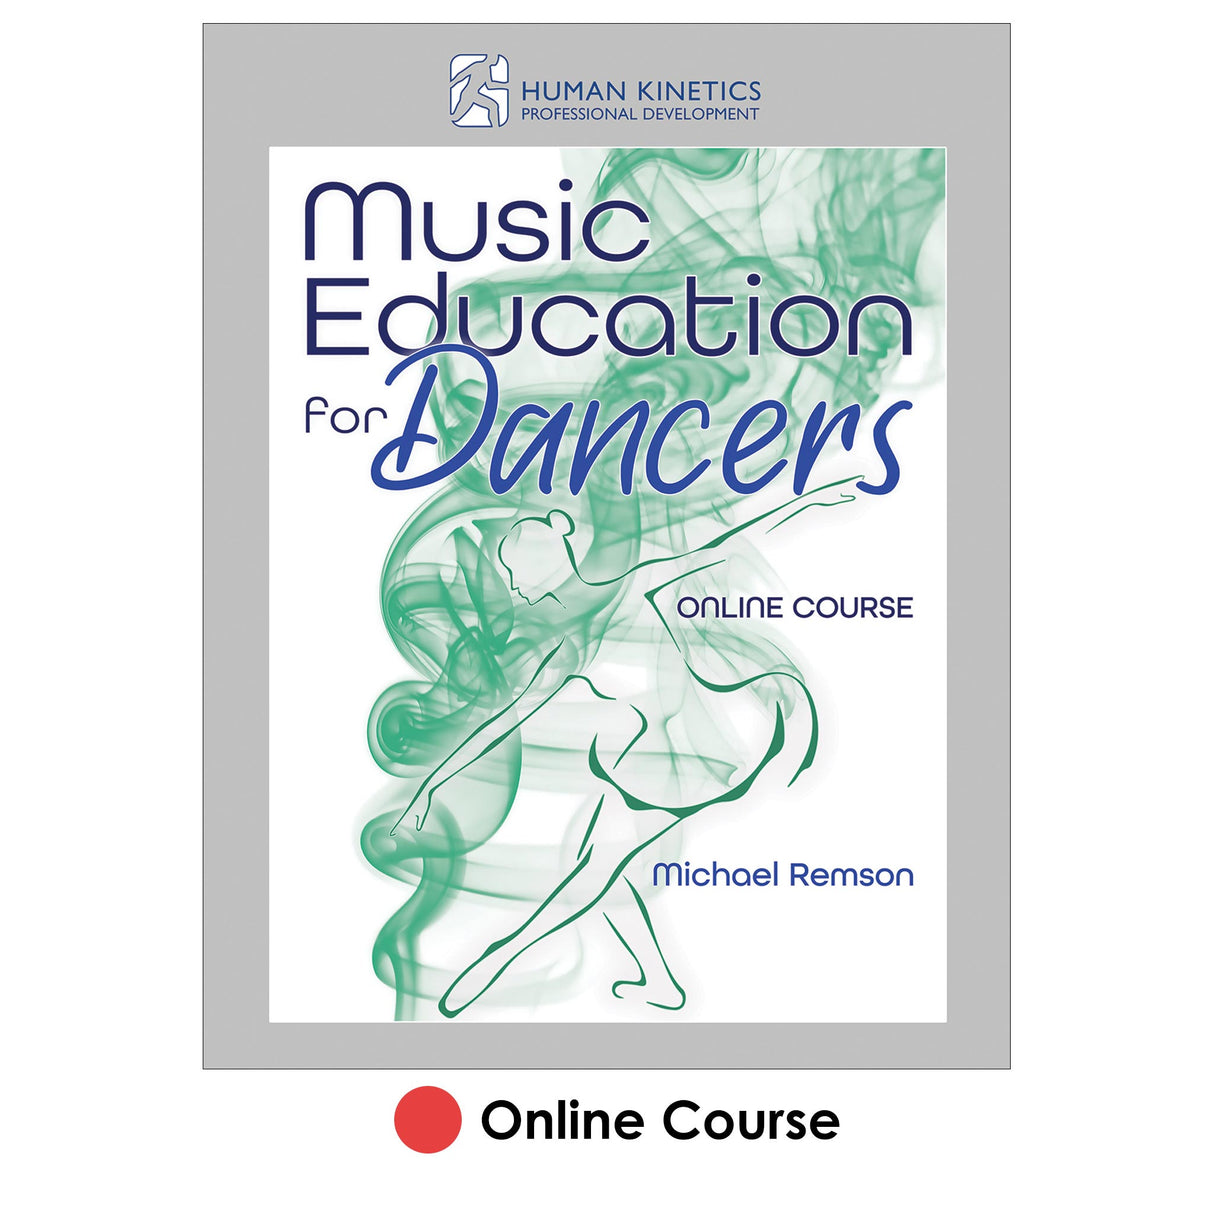 Music Education for Dancers Online Course